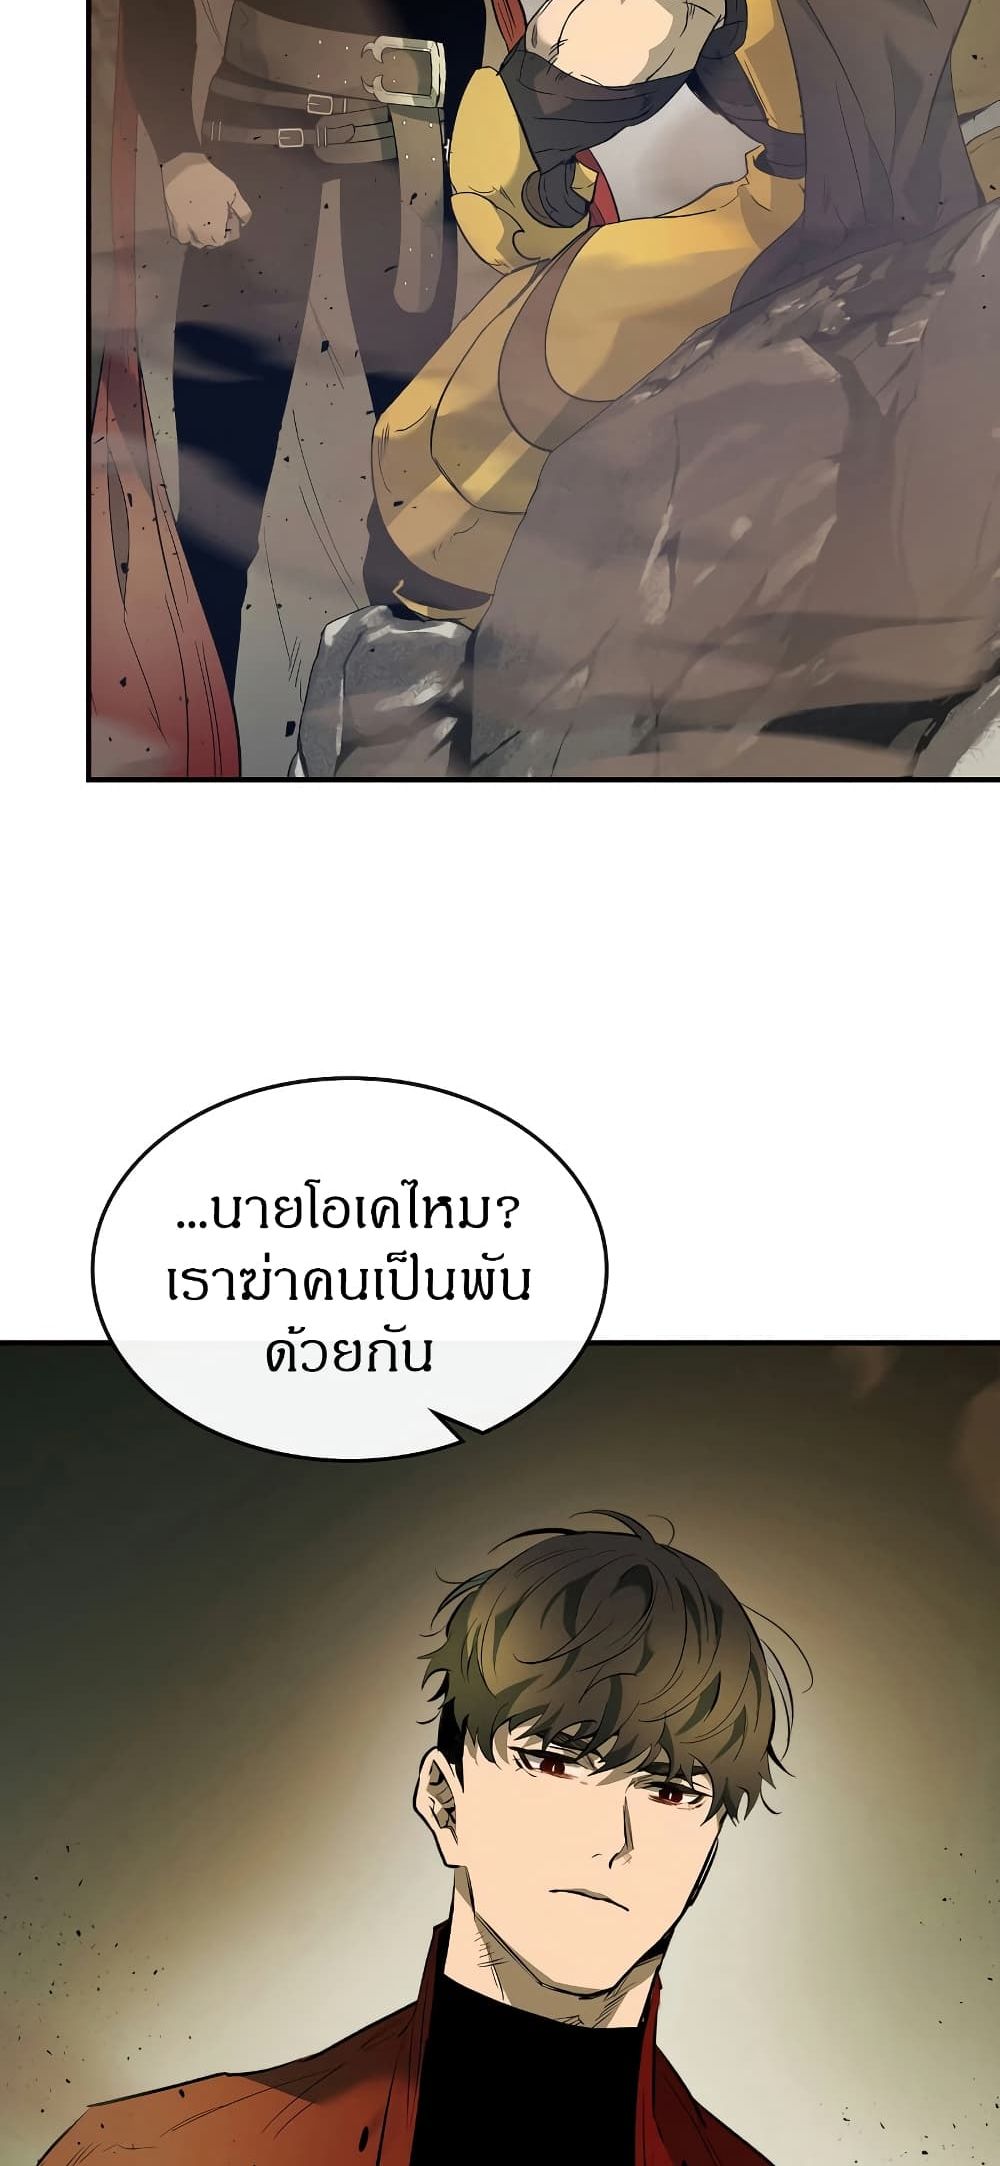 Leveling With The Gods 27 แปลไทย